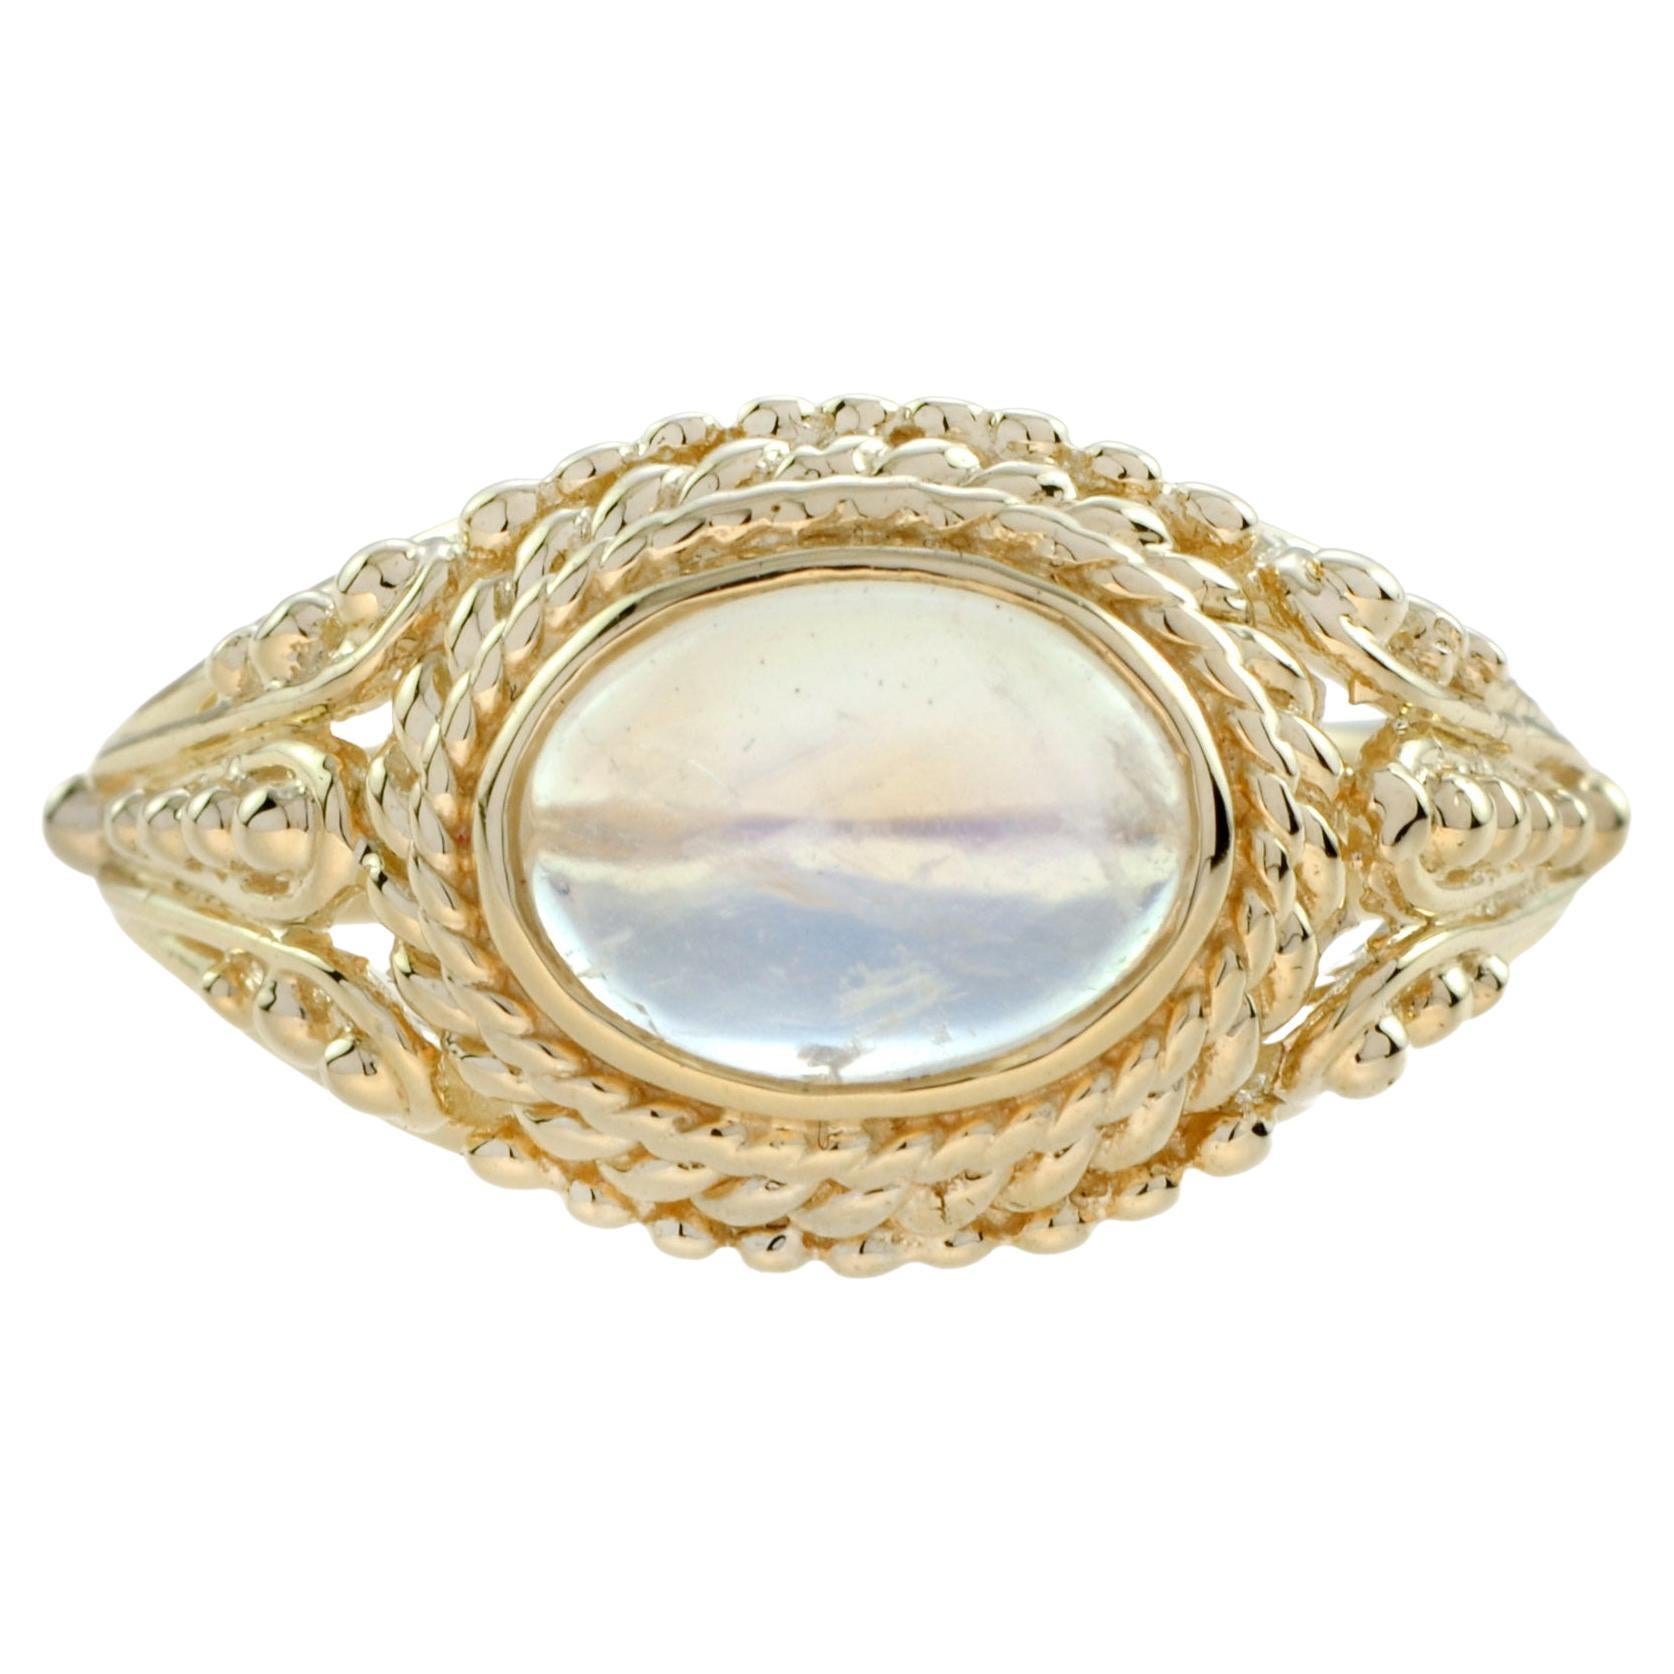 A confident addition to your digits, the blue moonstone centerpiece and luscious yellow gold base make every glance of this ring one to remember. A braided gold rope accent lends another dimension of color to accentuate the gem. 

Ring